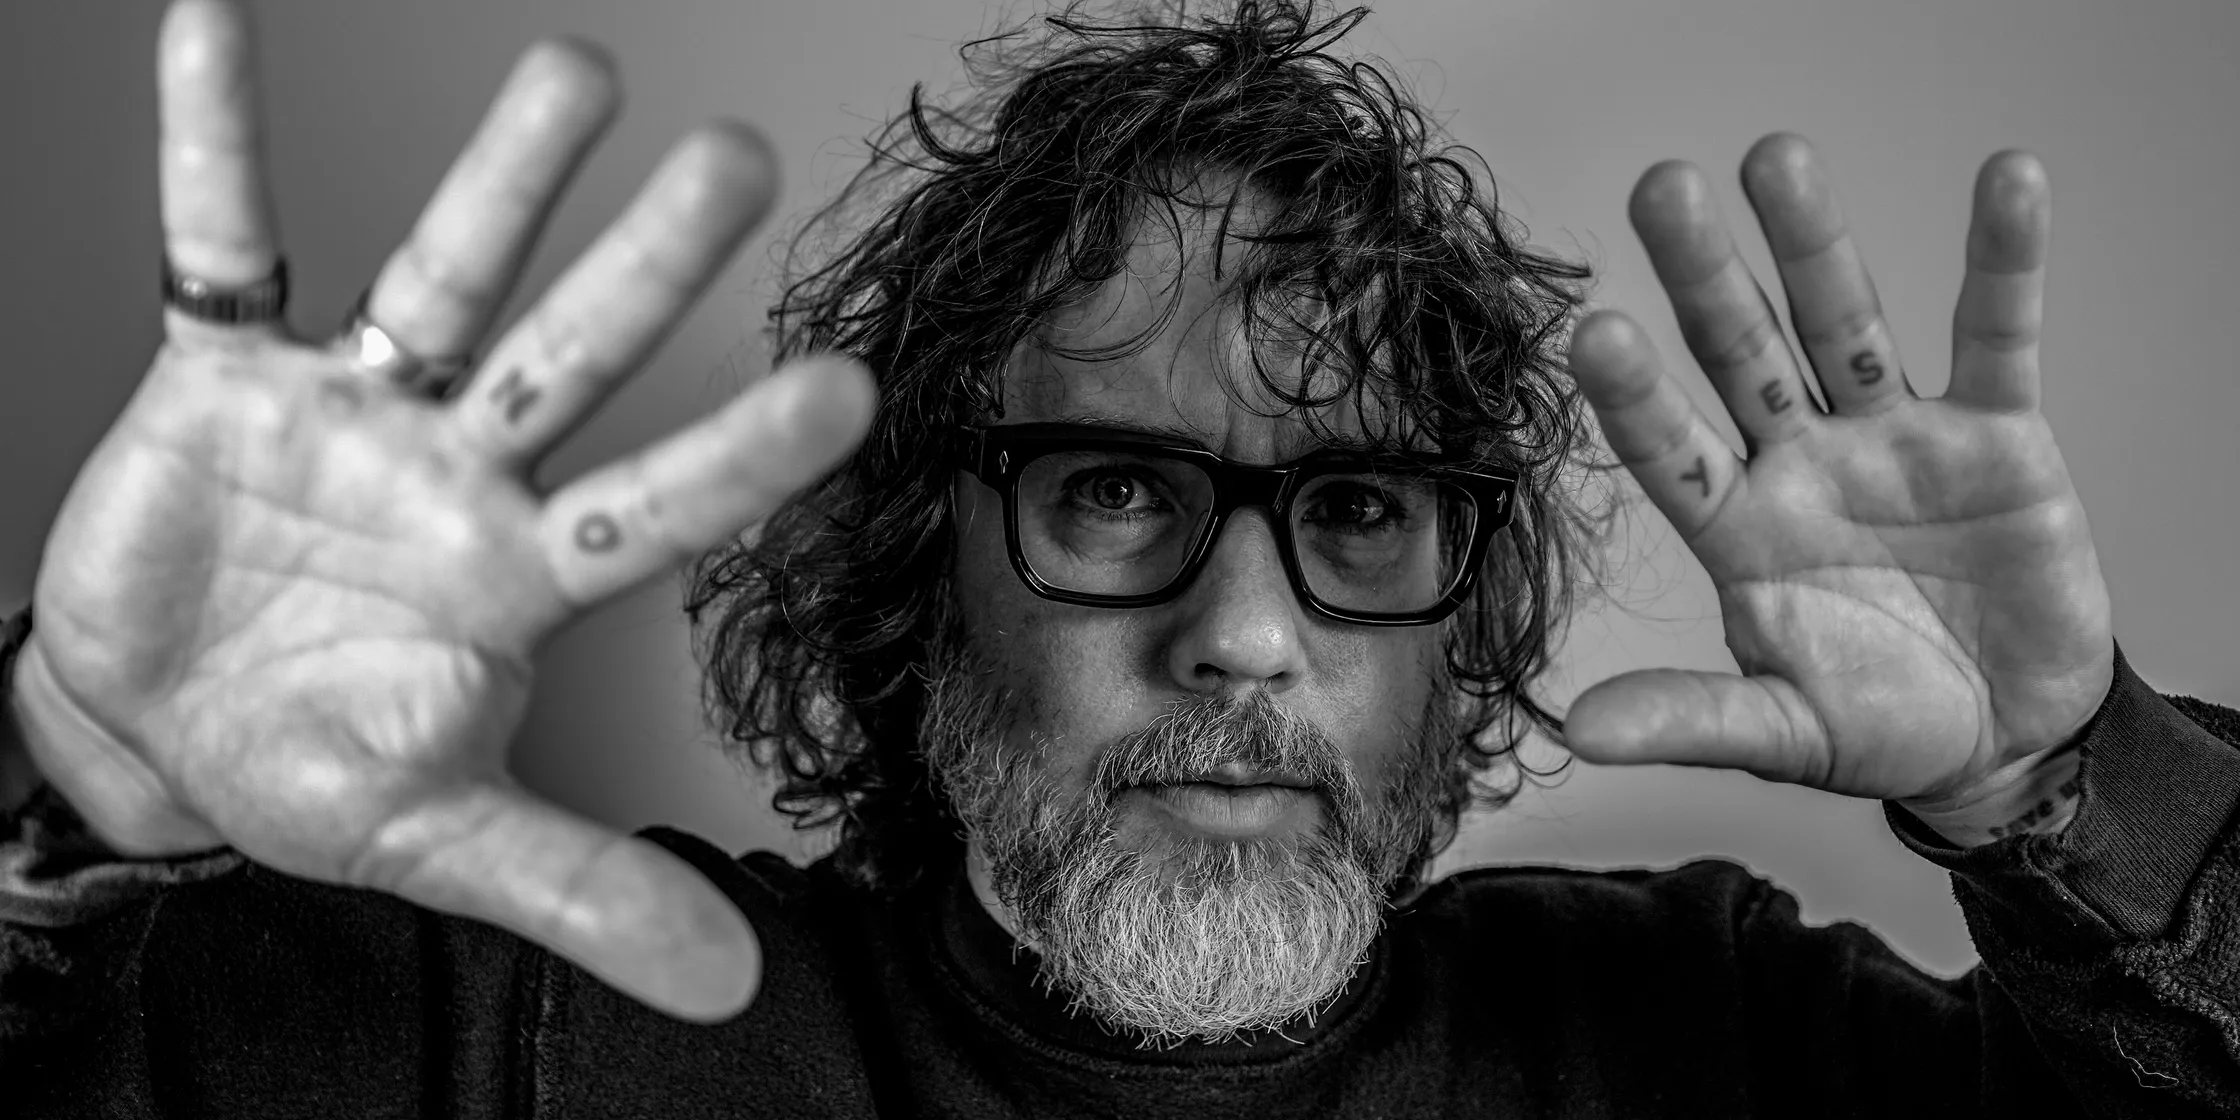 Kevin Drew of Broken Social Scene Shares New Song “Out In The Fields”